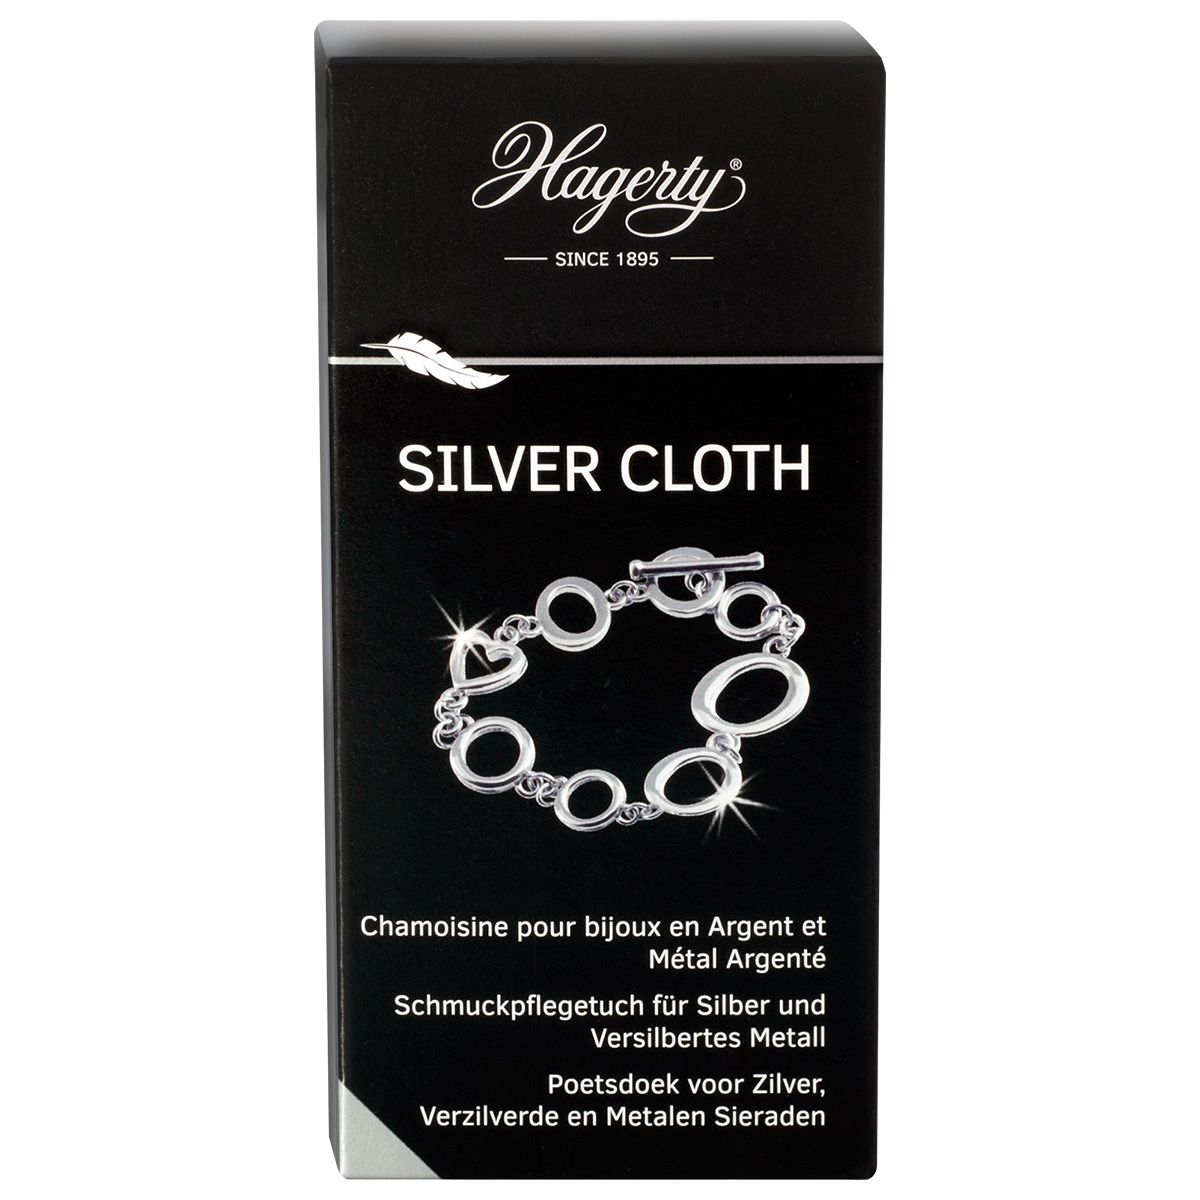 Hagerty Silver Cloth, care cloth for silver, 36 x 30 cm